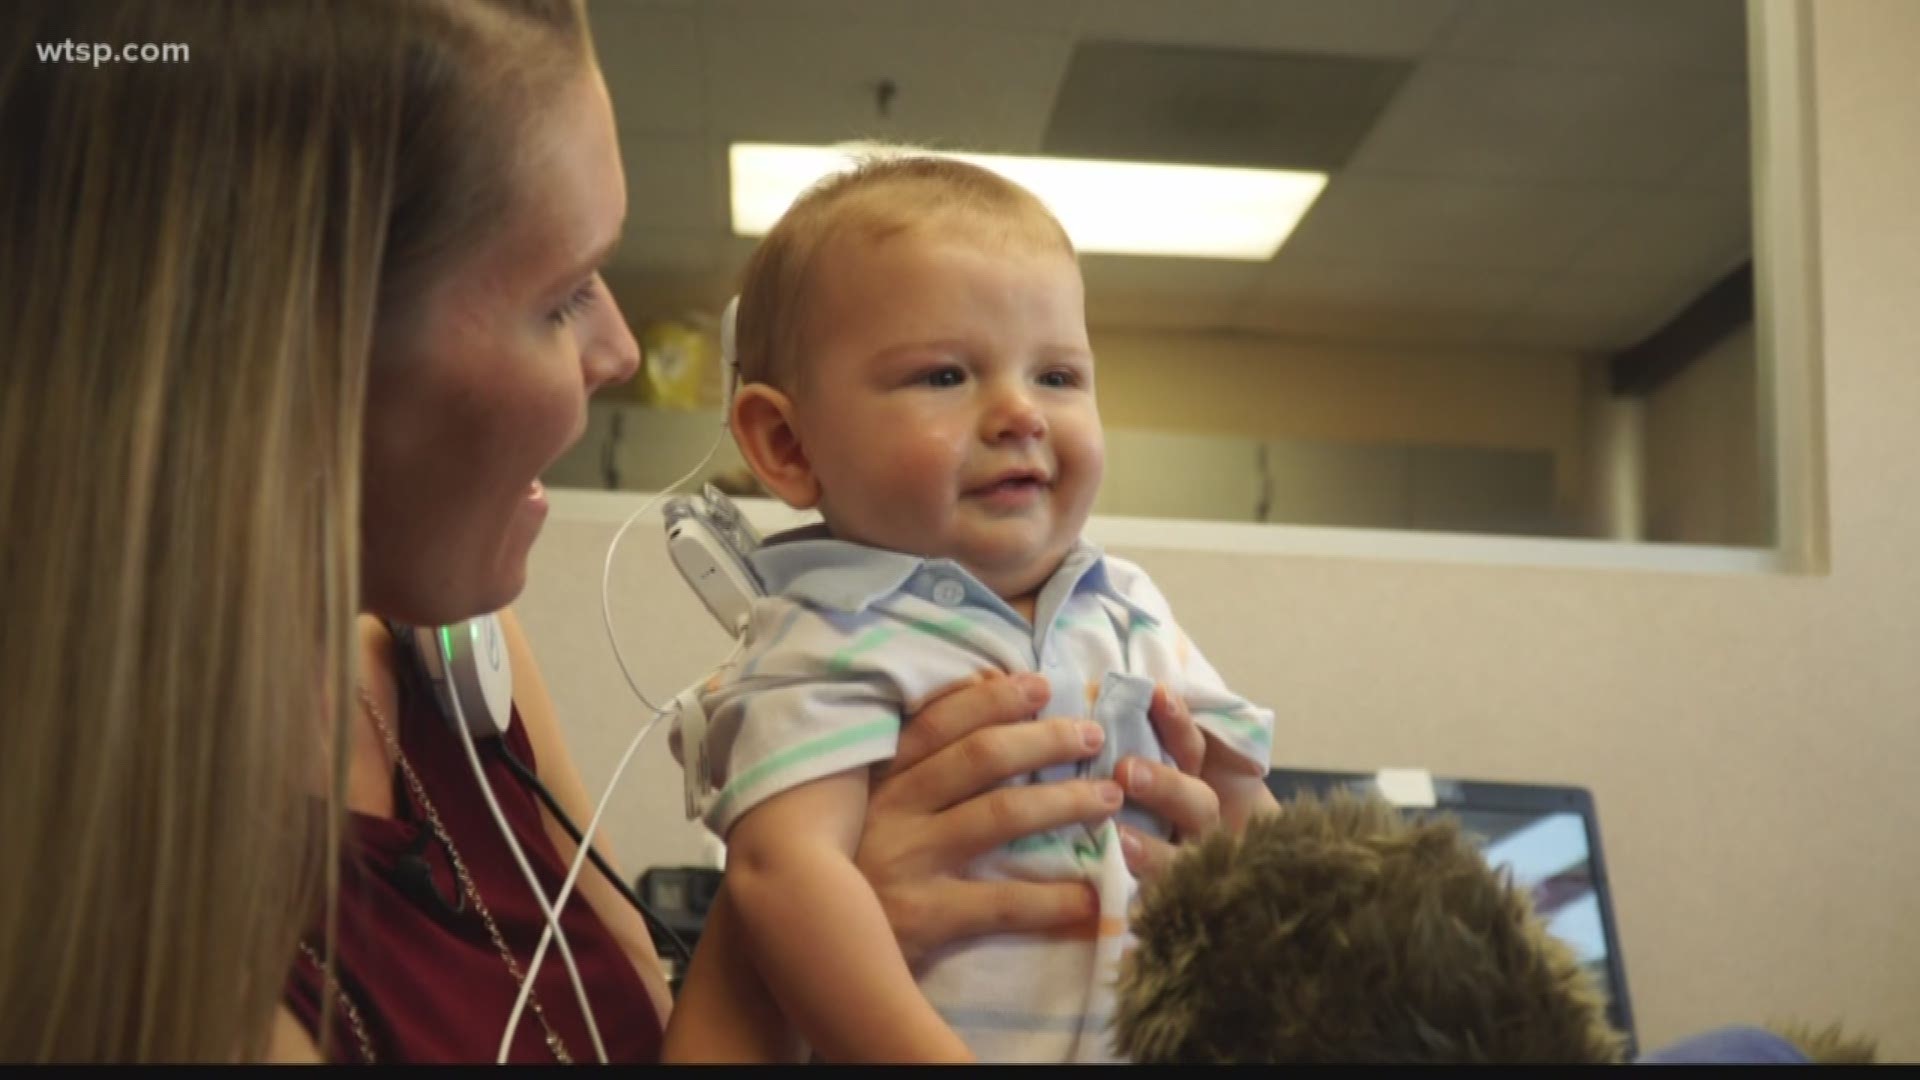 His parents worried he might never hear their voices, but a Florida doctor made it possible